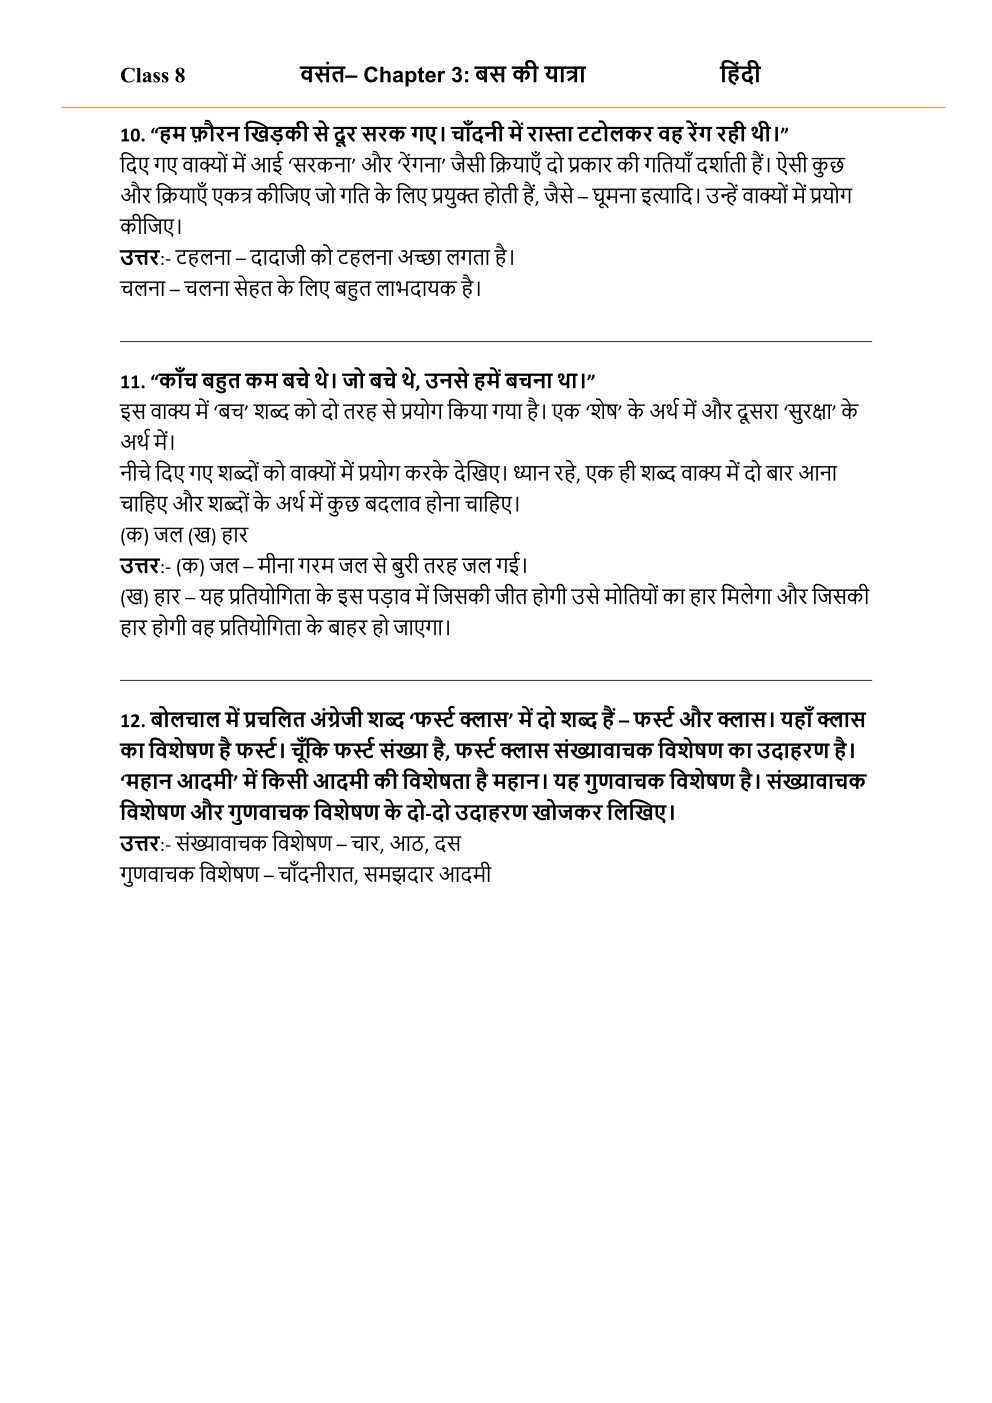 NCERT Solutions For Class 8 Hindi Vasant Chapter 3